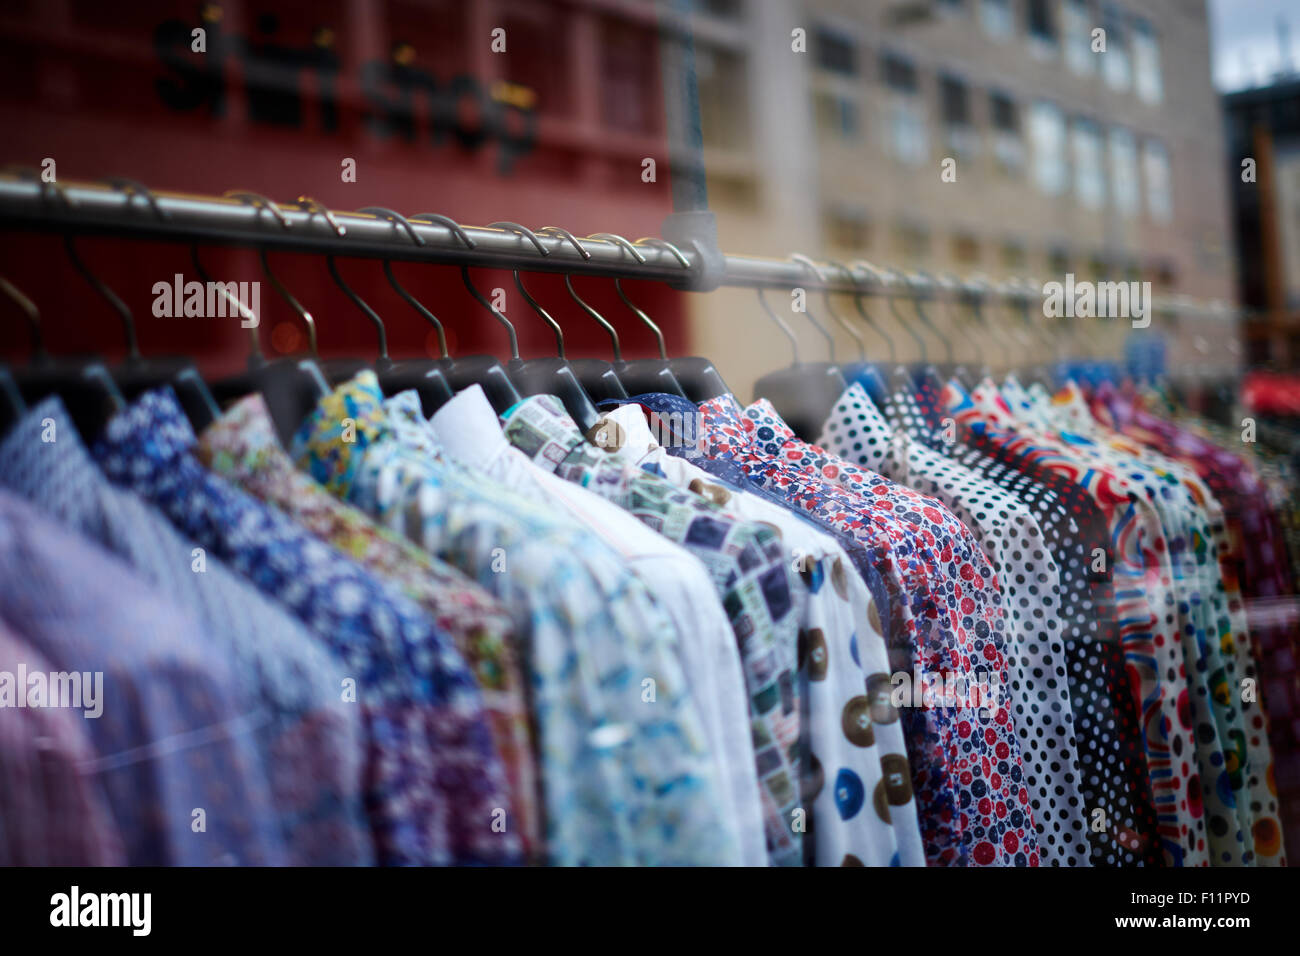 Rack of colourful shirts in a shop. Stock Photo